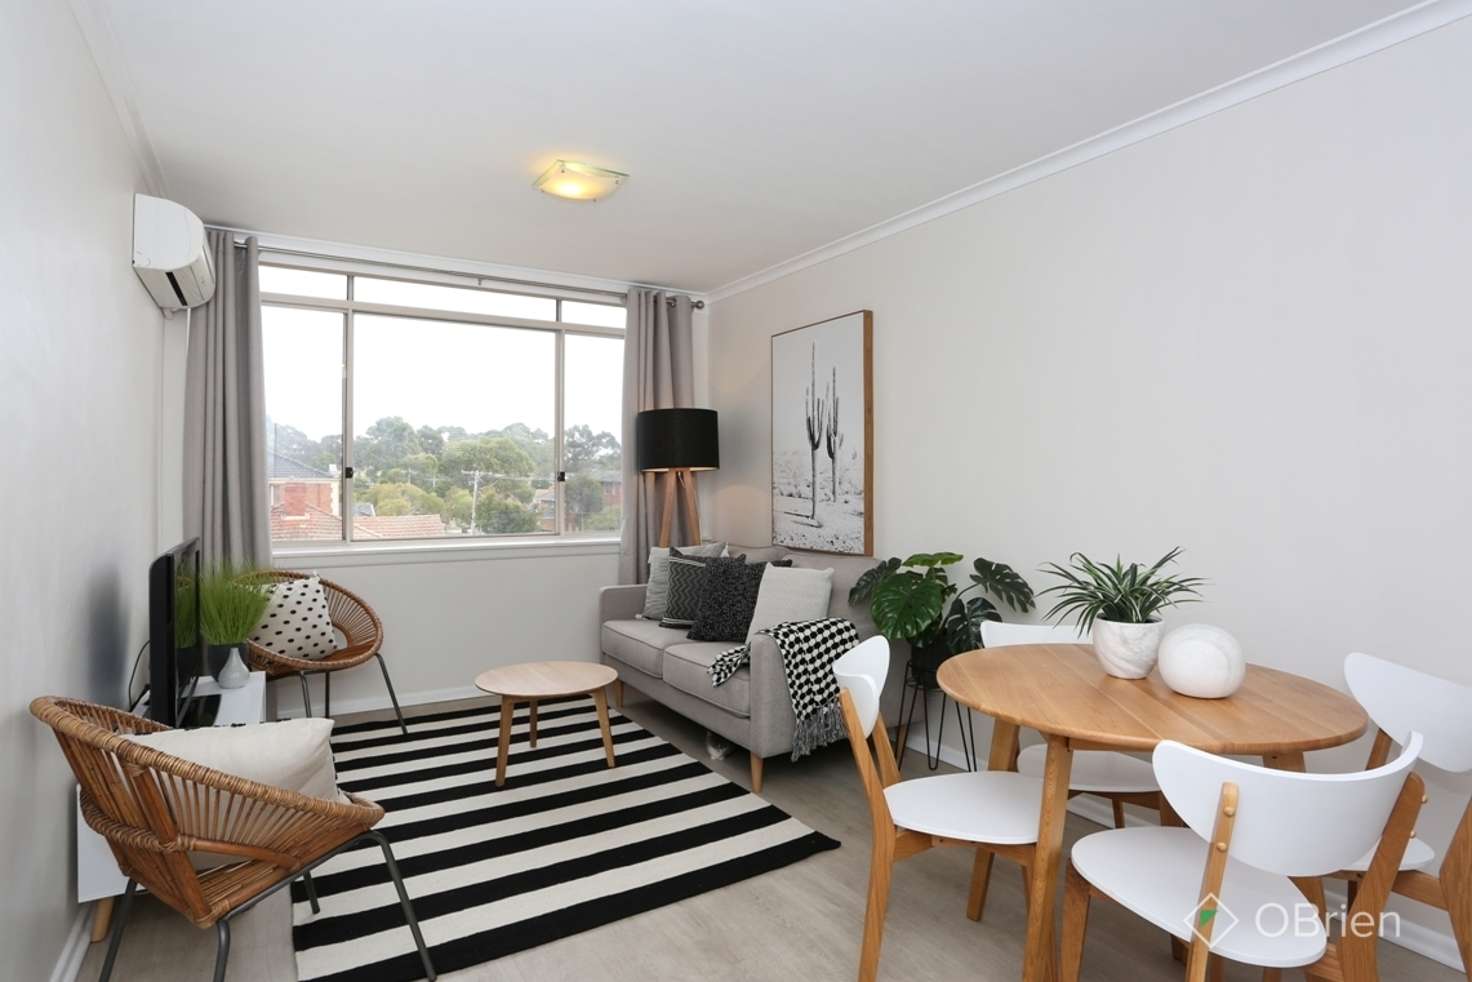 Main view of Homely apartment listing, 7/5 James Street, Box Hill VIC 3128